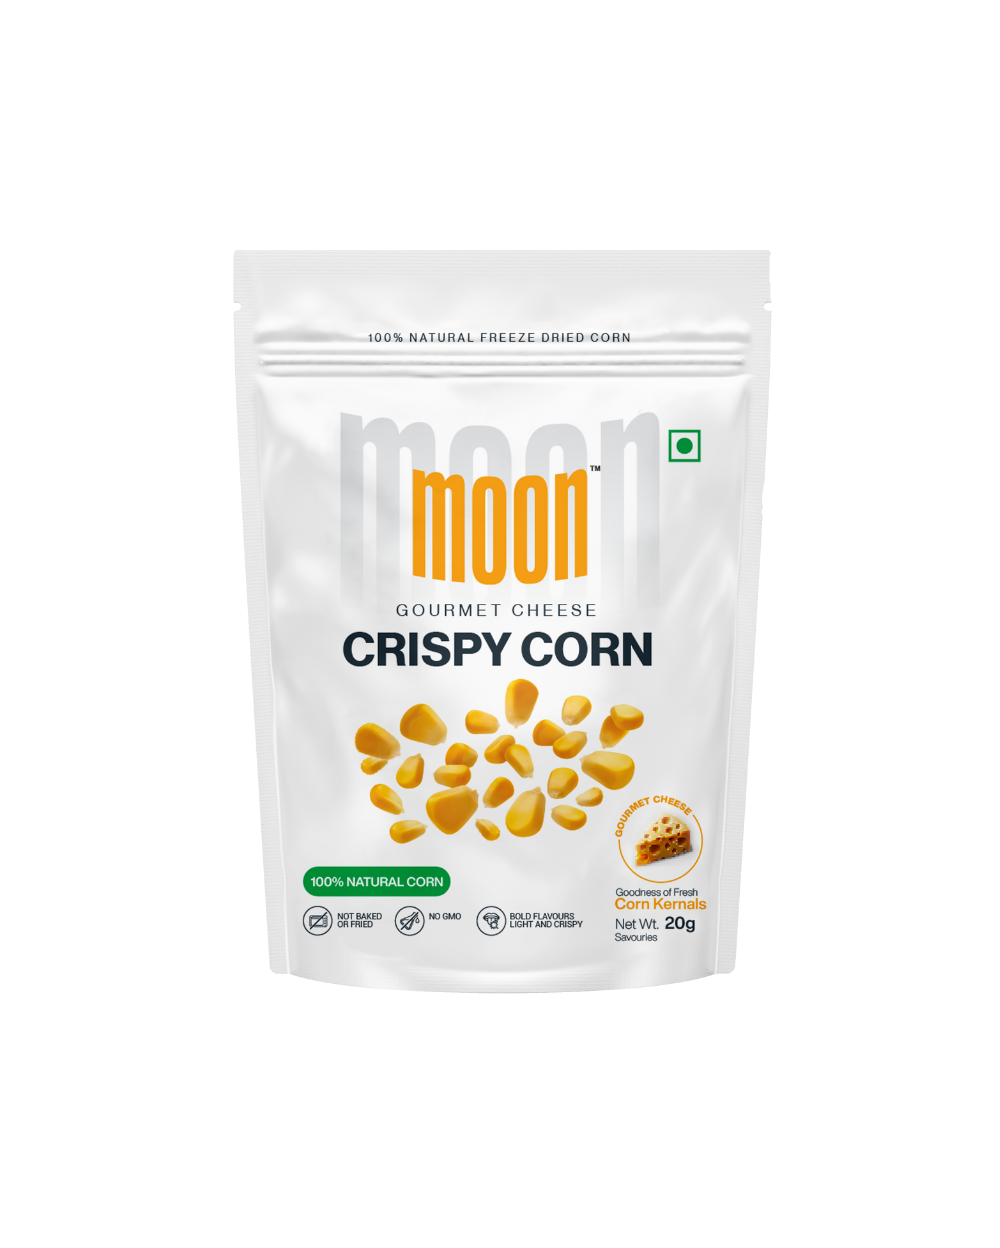 A bag of MOONFREEZE FOODS PRIVATE LIMITED Freeze Dried Crispy Corn Gourmet Cheese on a white background.